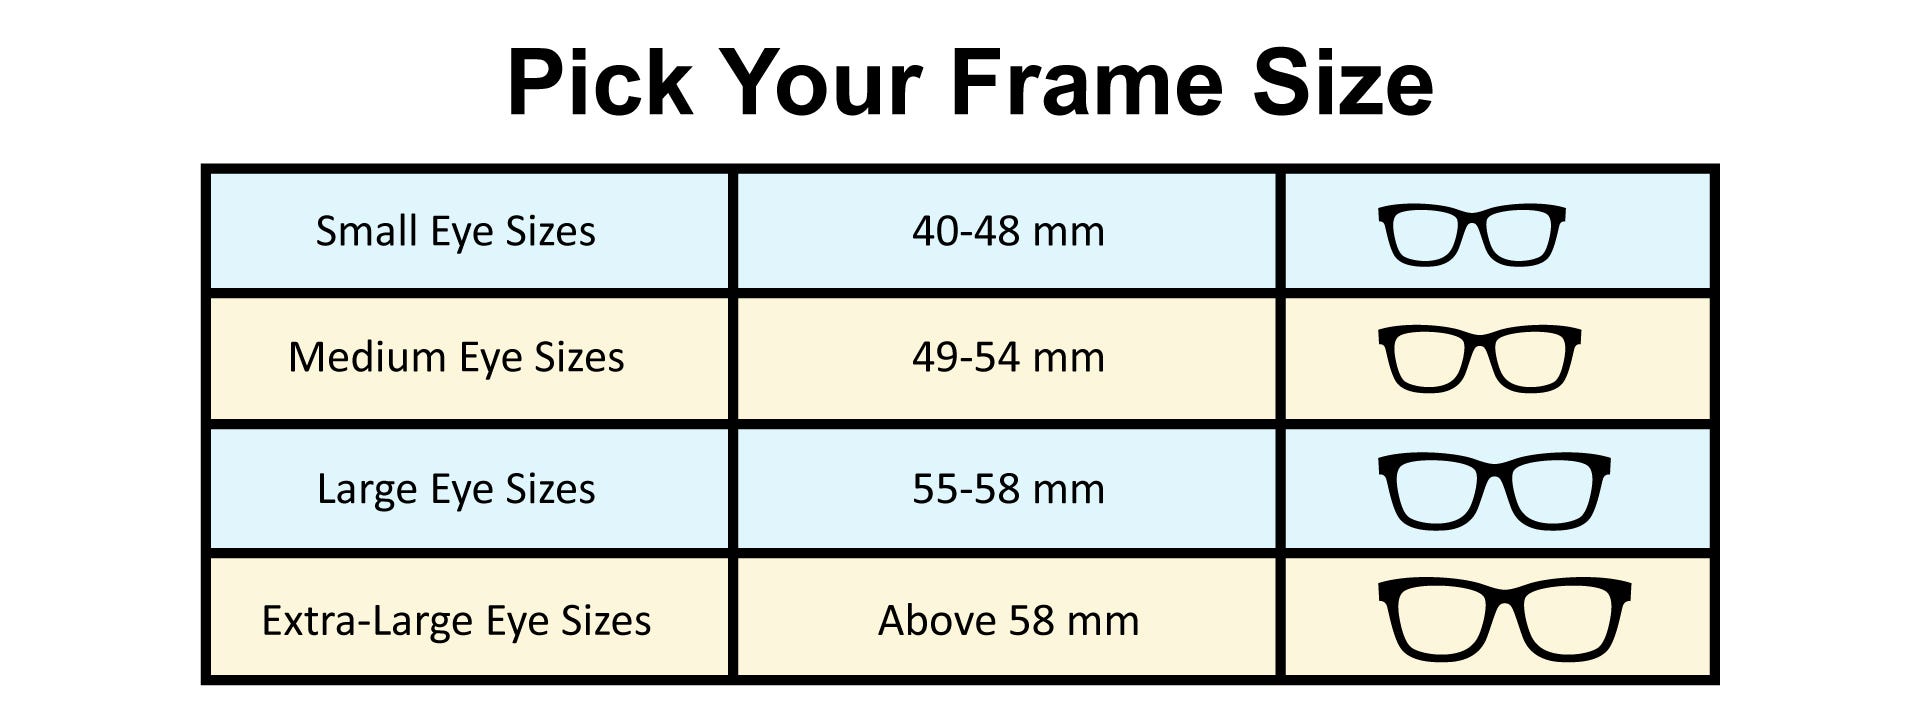 Choose The Size of The Frame Wisely: